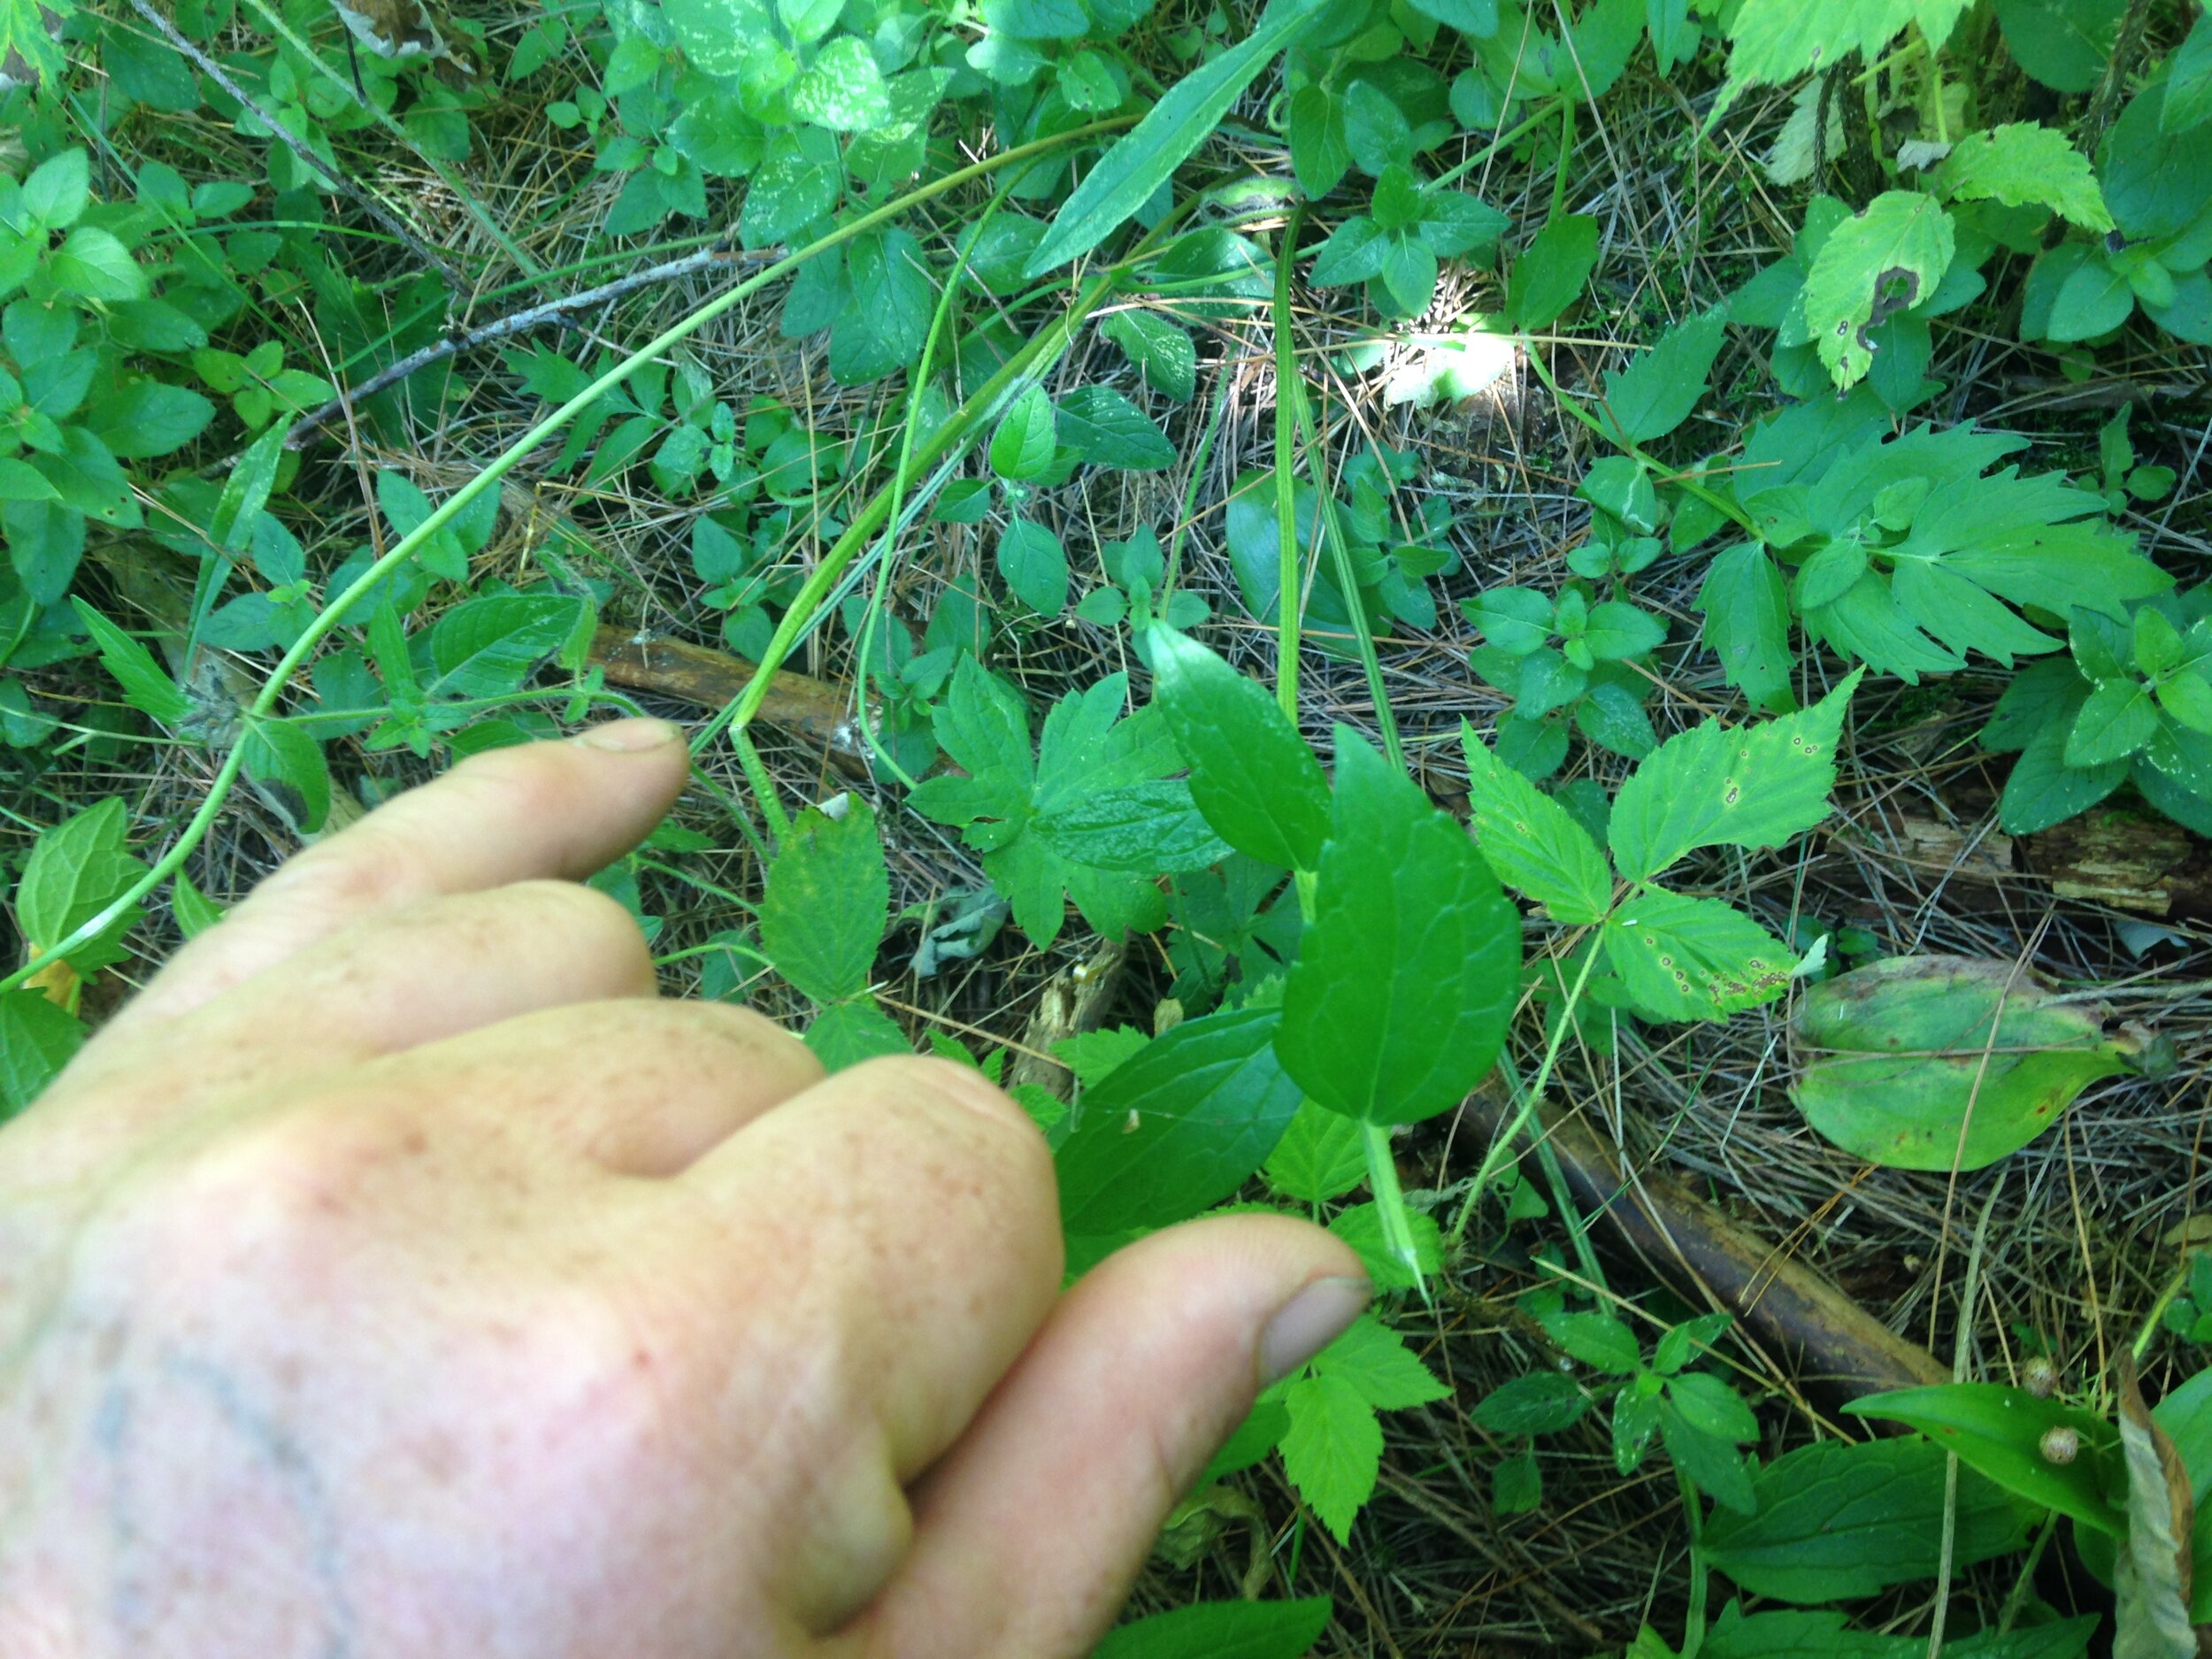  Deer browse and bent stem along Deer trail pointed to with my fingers 